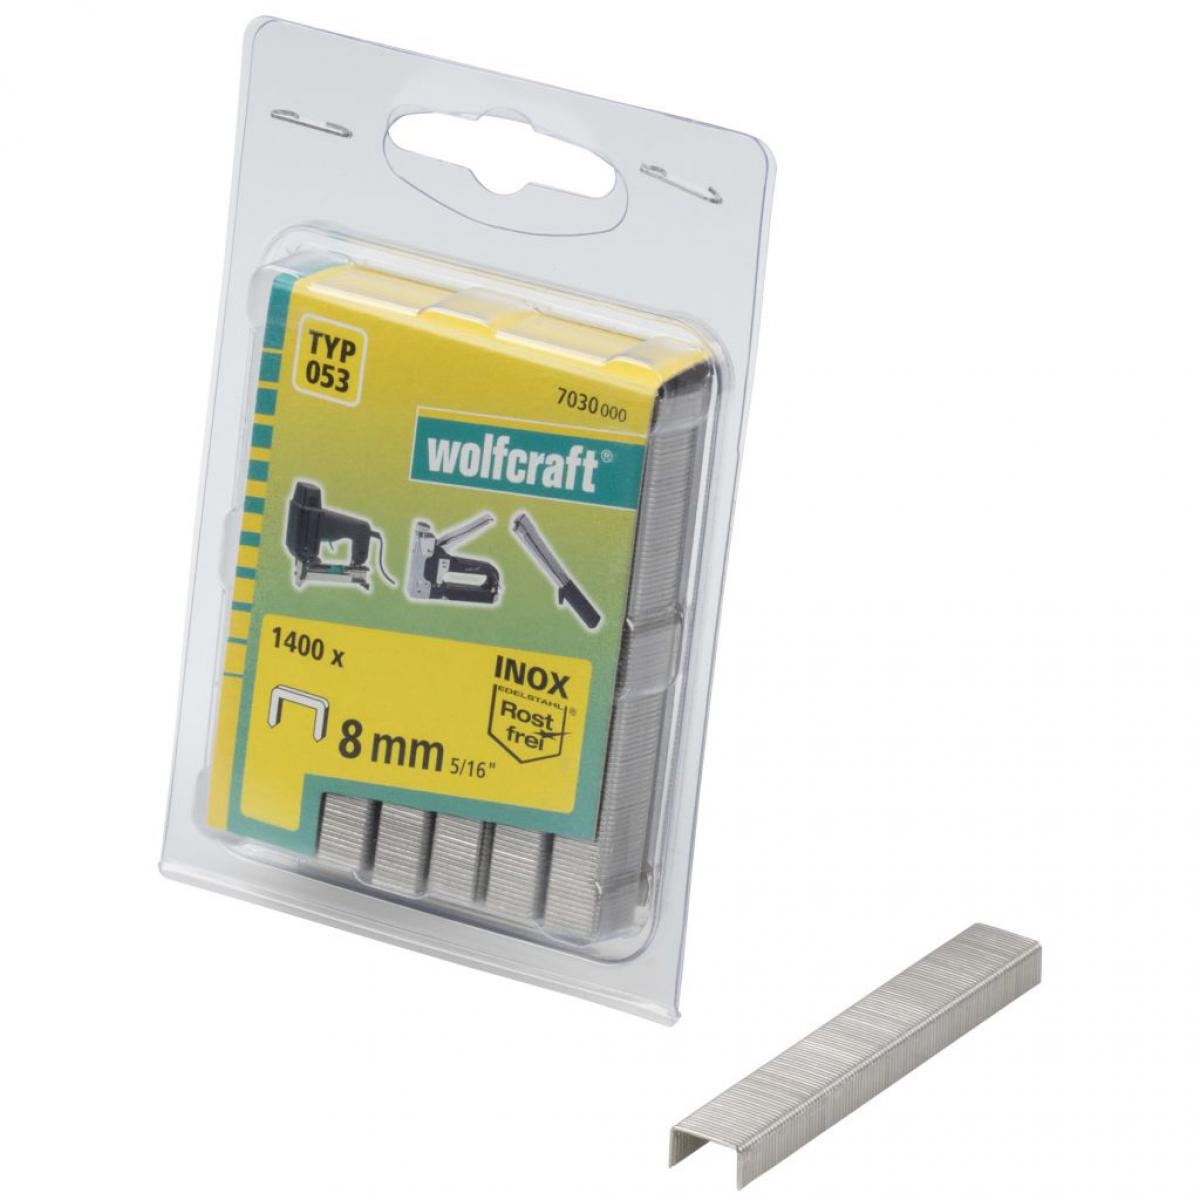 Wolfcraft - wolfcraft Agrafes à dos large Type 053 1400 pcs 8 mm 7030000 - Clouterie